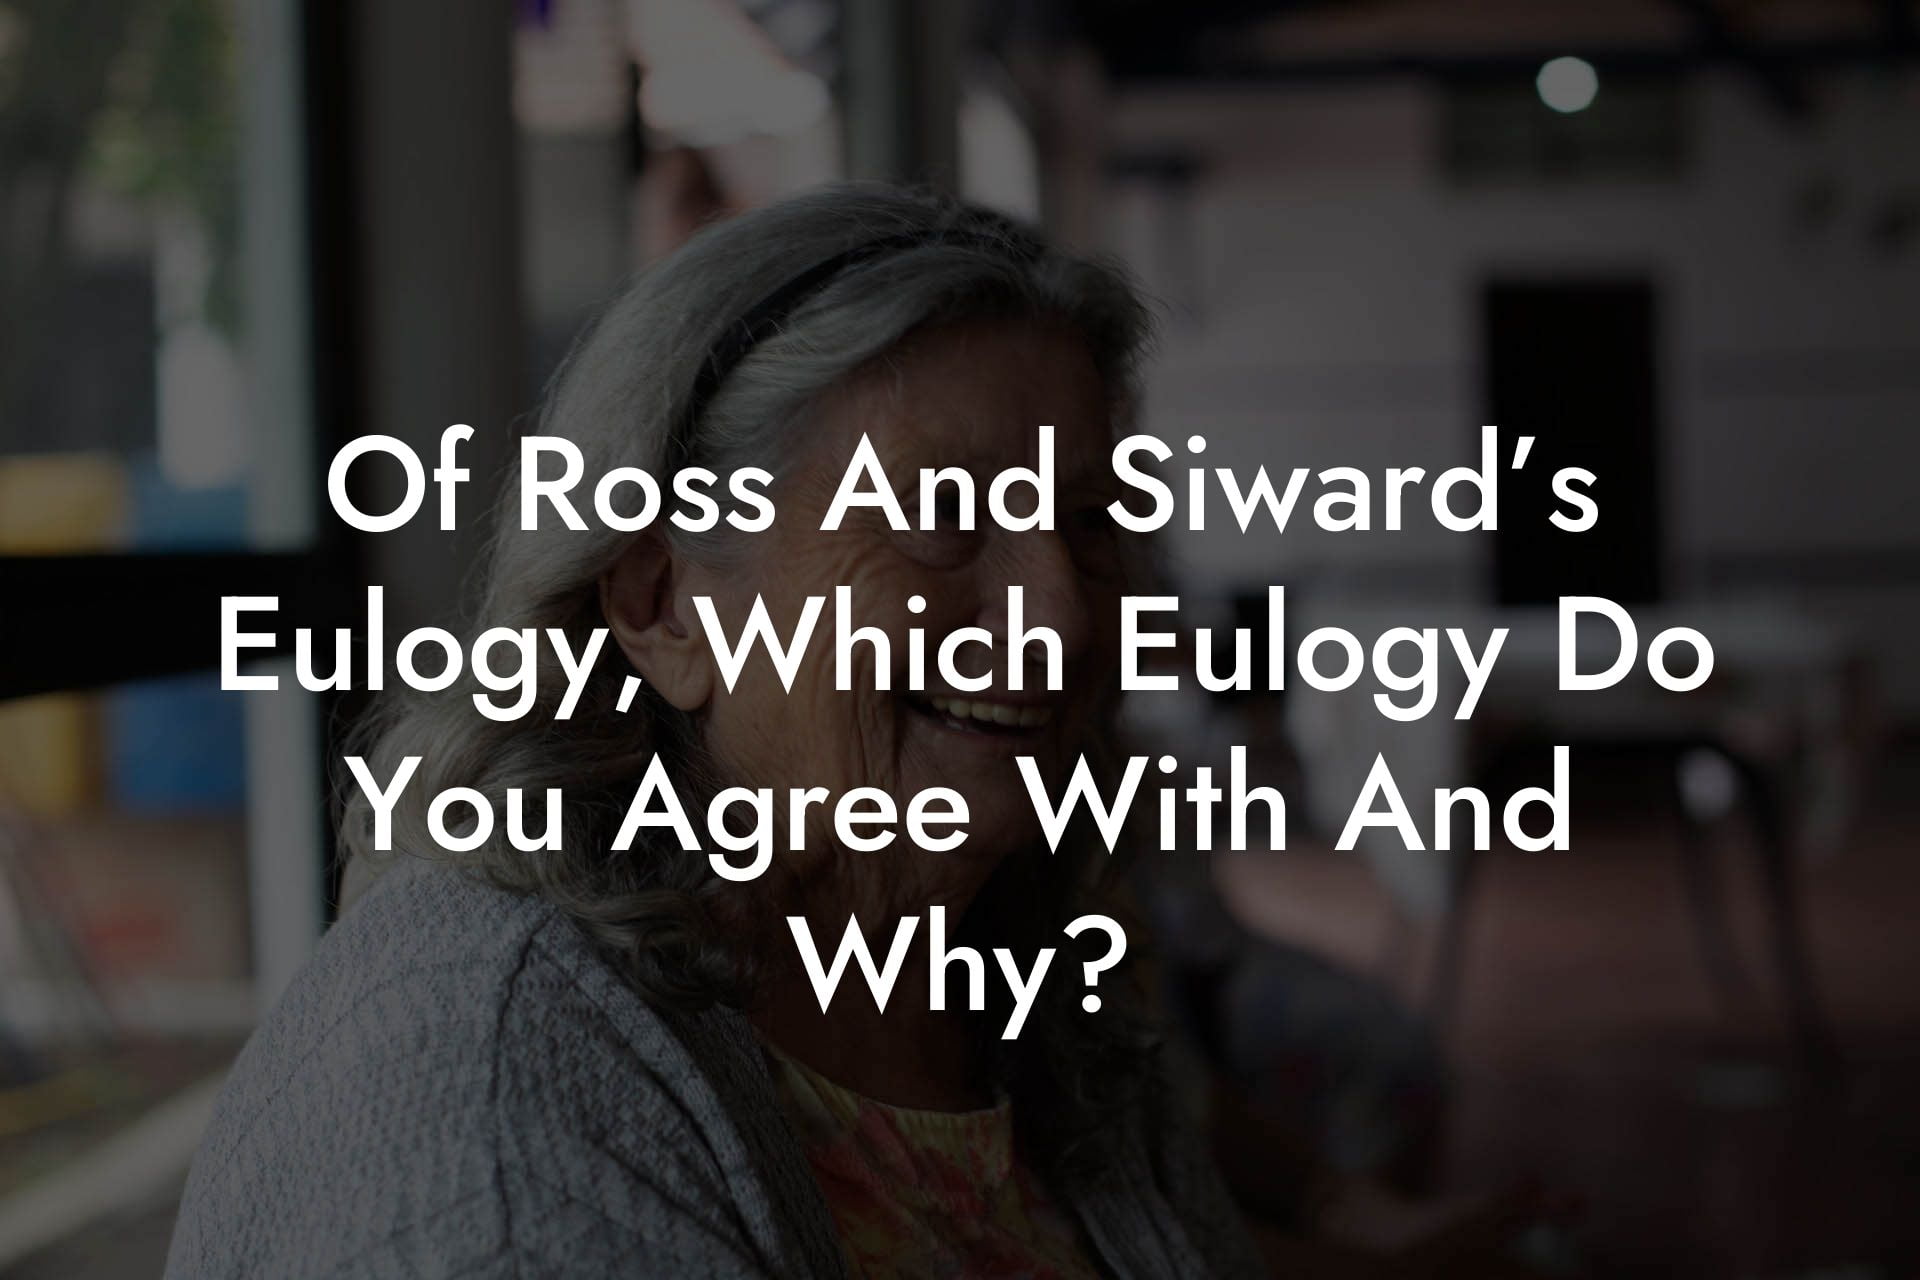 Of Ross And Siward’s Eulogy, Which Eulogy Do You Agree With And Why?